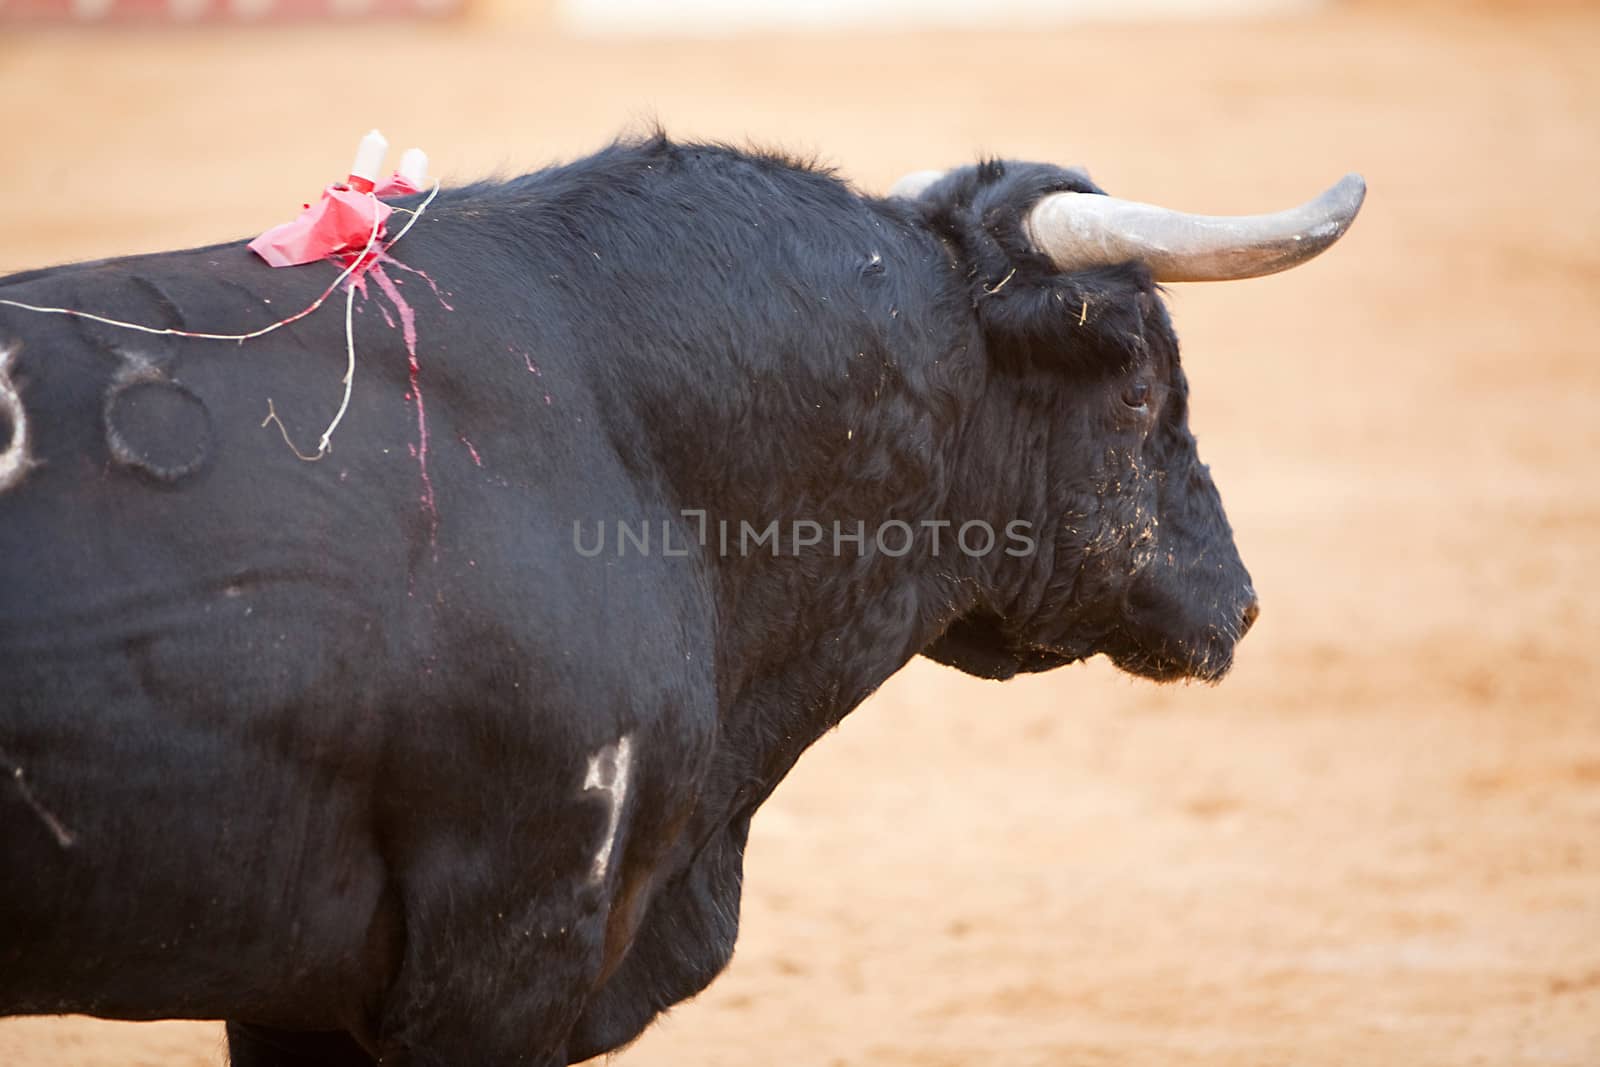  Fighting bull, Spain by digicomphoto